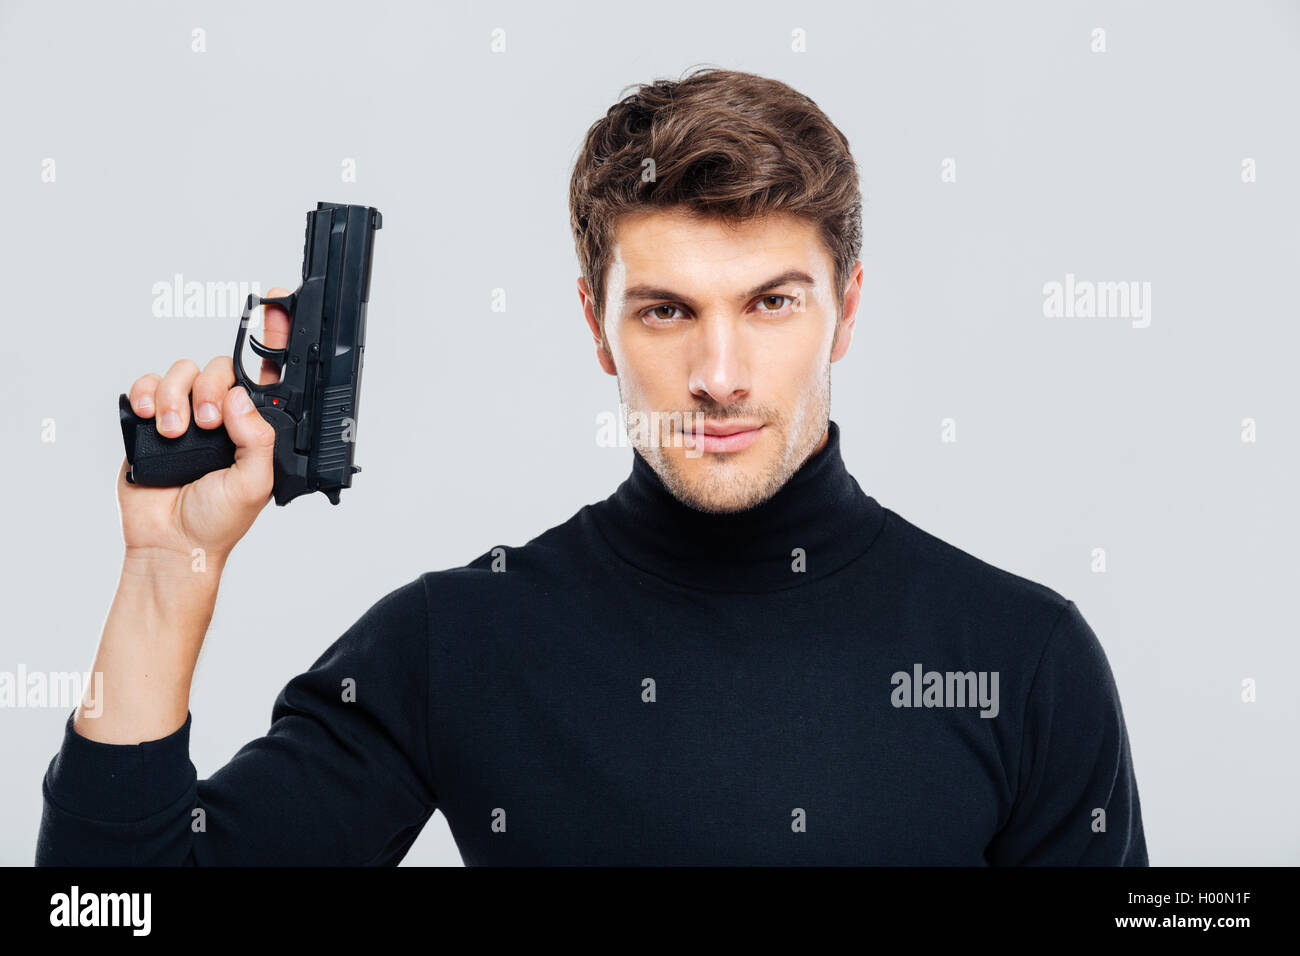 Portrait of handsome young man holding a gun Stock Photo